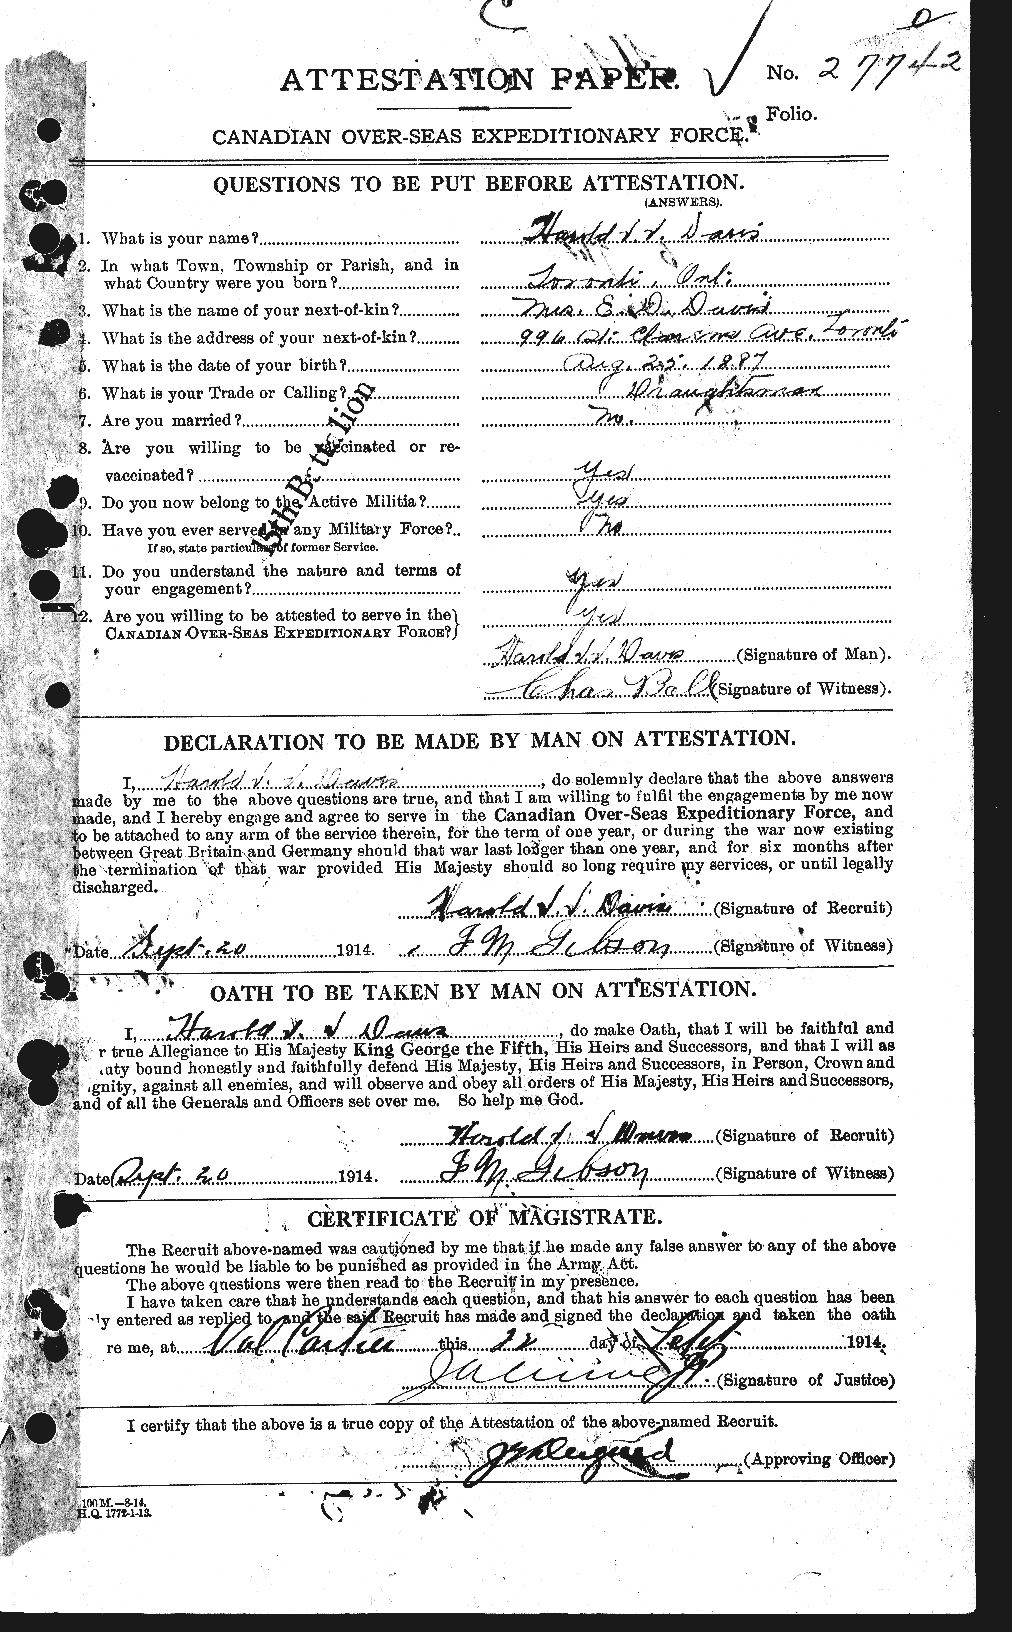 Personnel Records of the First World War - CEF 282054a